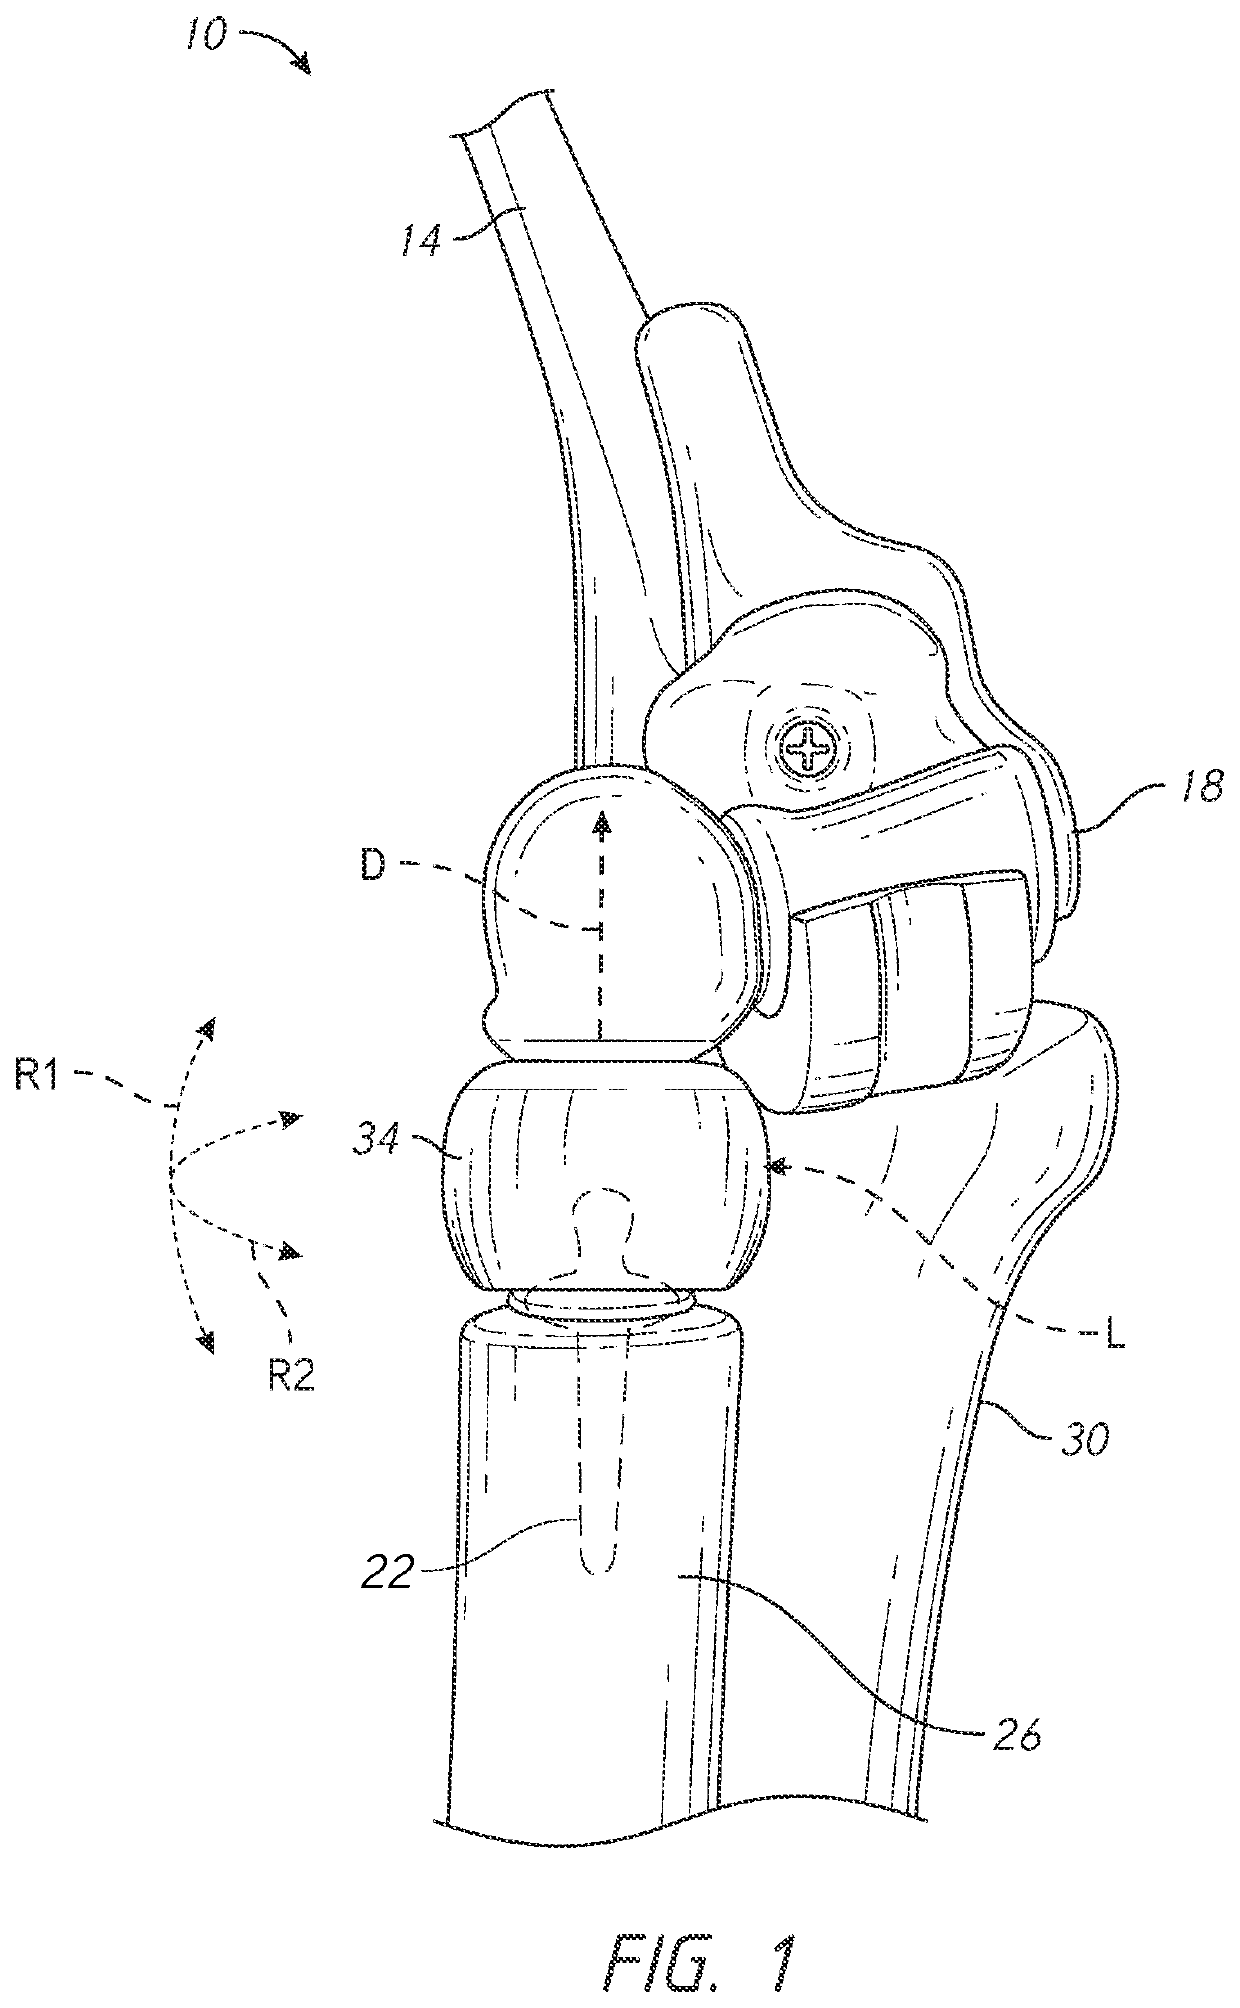 Elbow joint prostheses